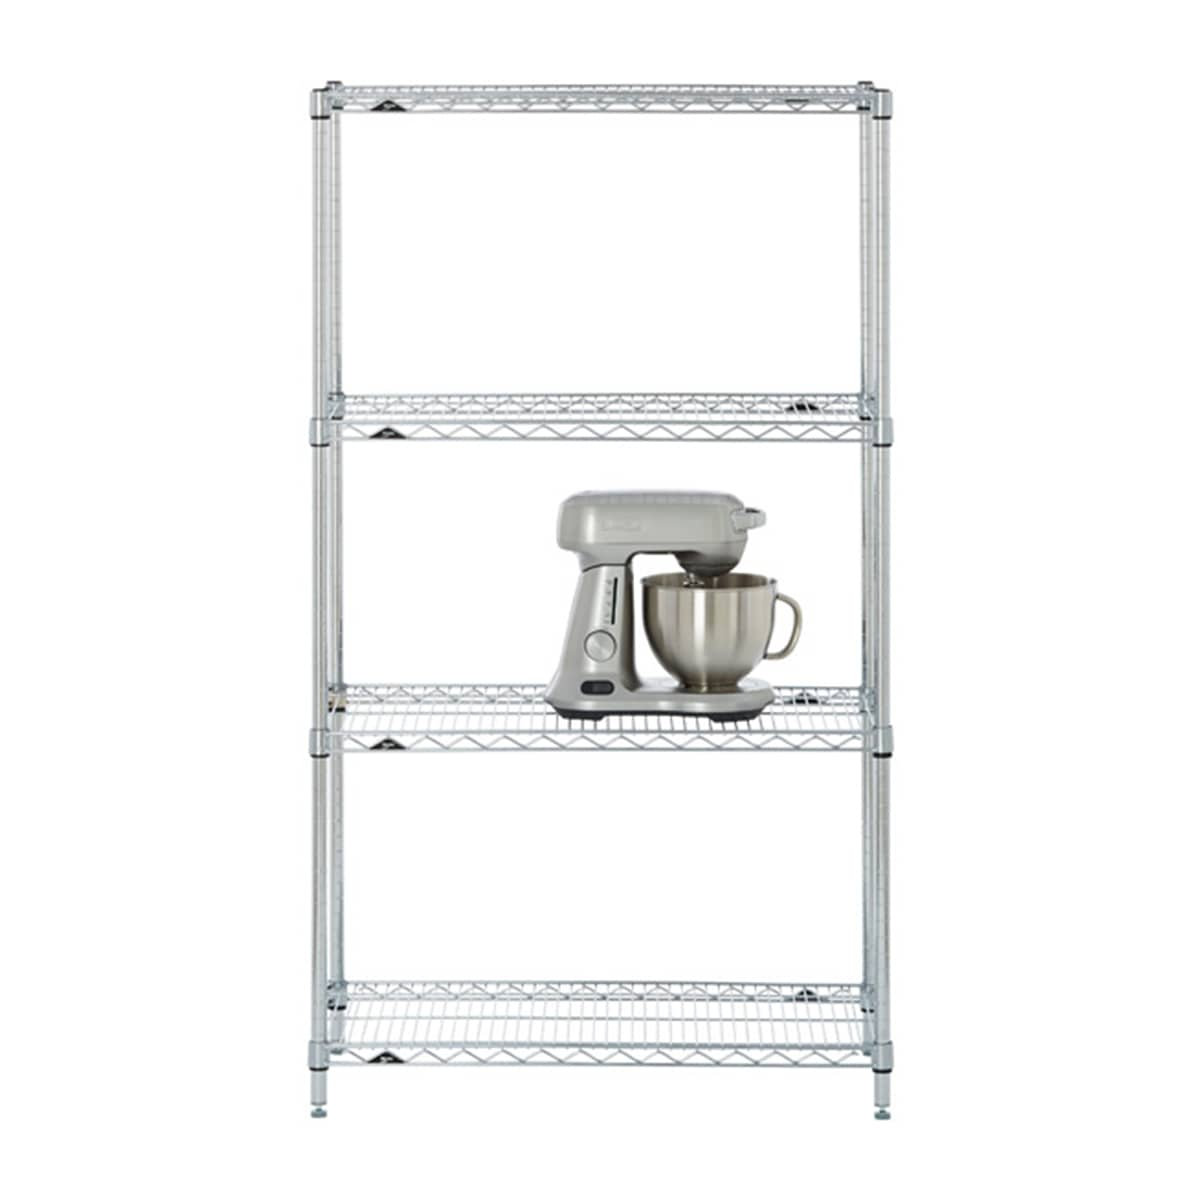 Origami Folding Rack The Best Kitchen Shelves At The Container Store Kitchn